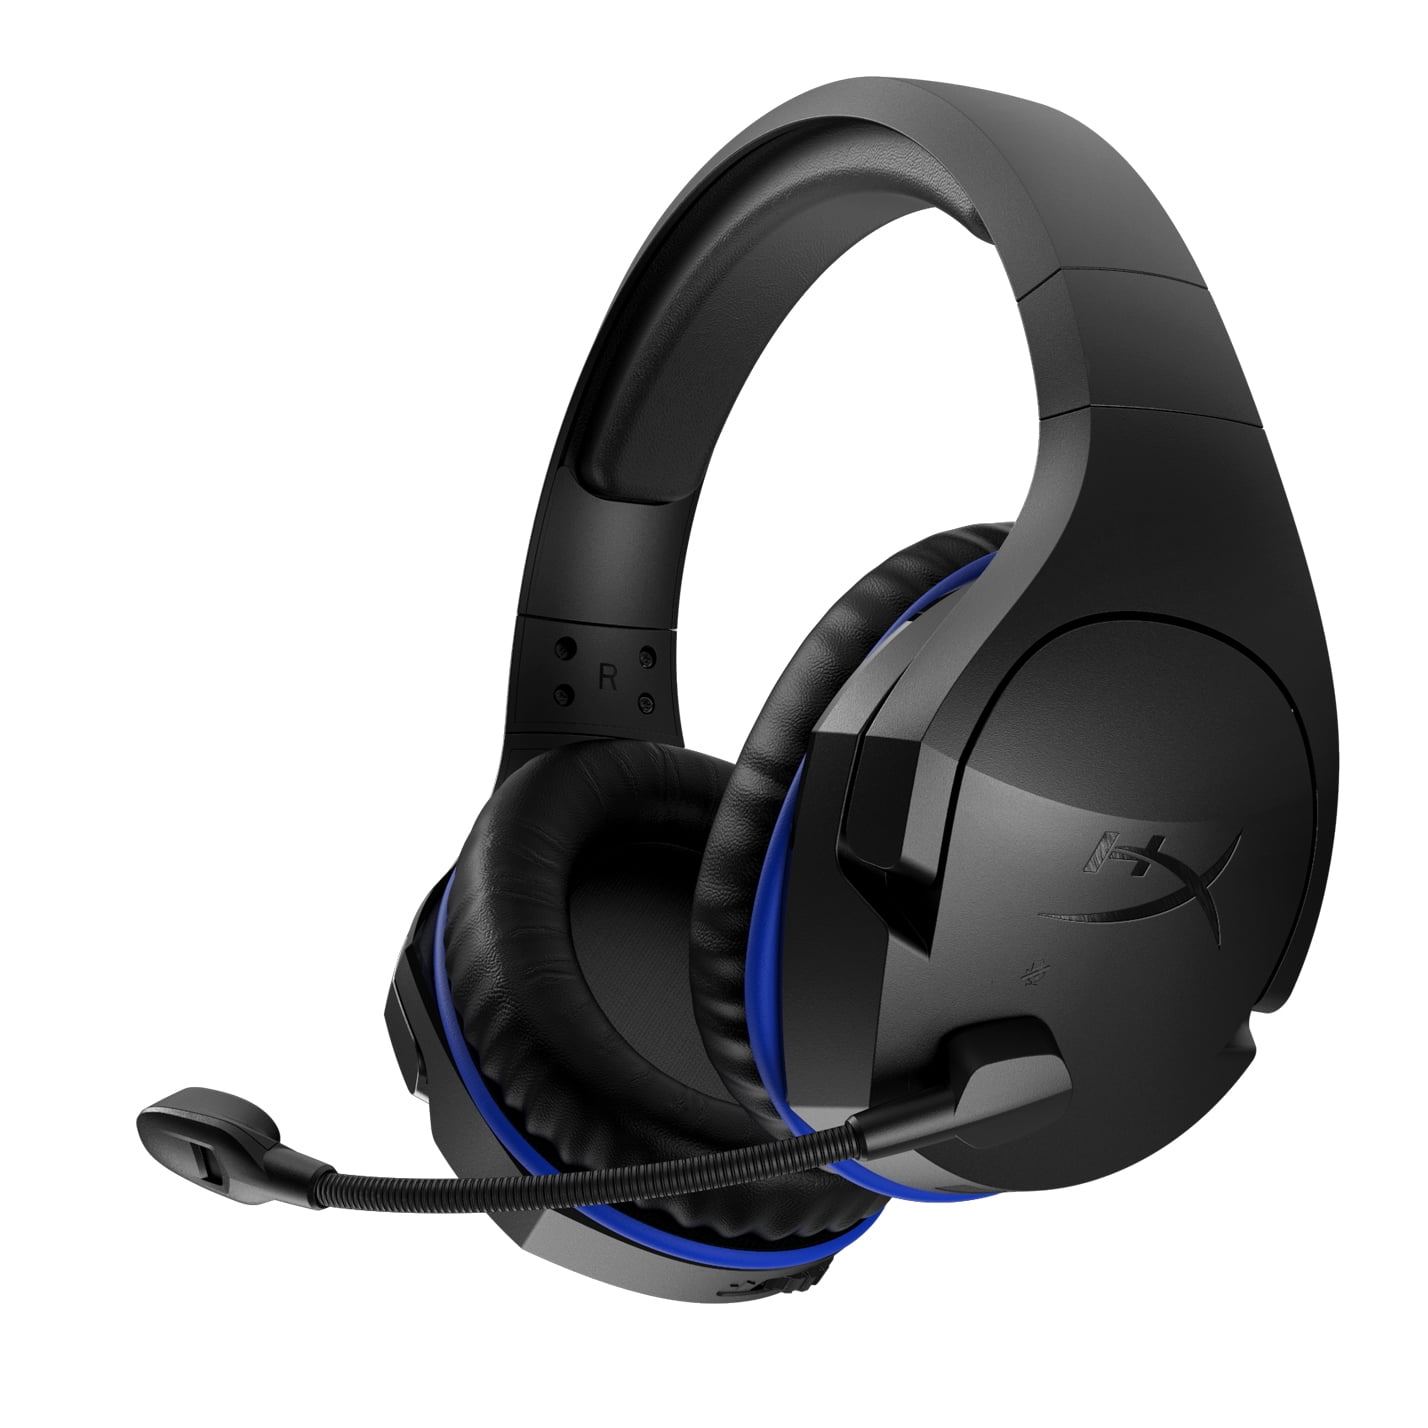 HyperX Cloud Stinger – Gaming Headset, Lightweight, Comfortable Memory  Foam, Swivel to Mute Noise-Cancellation Mic, Works on PC, PS4, PS5, Xbox